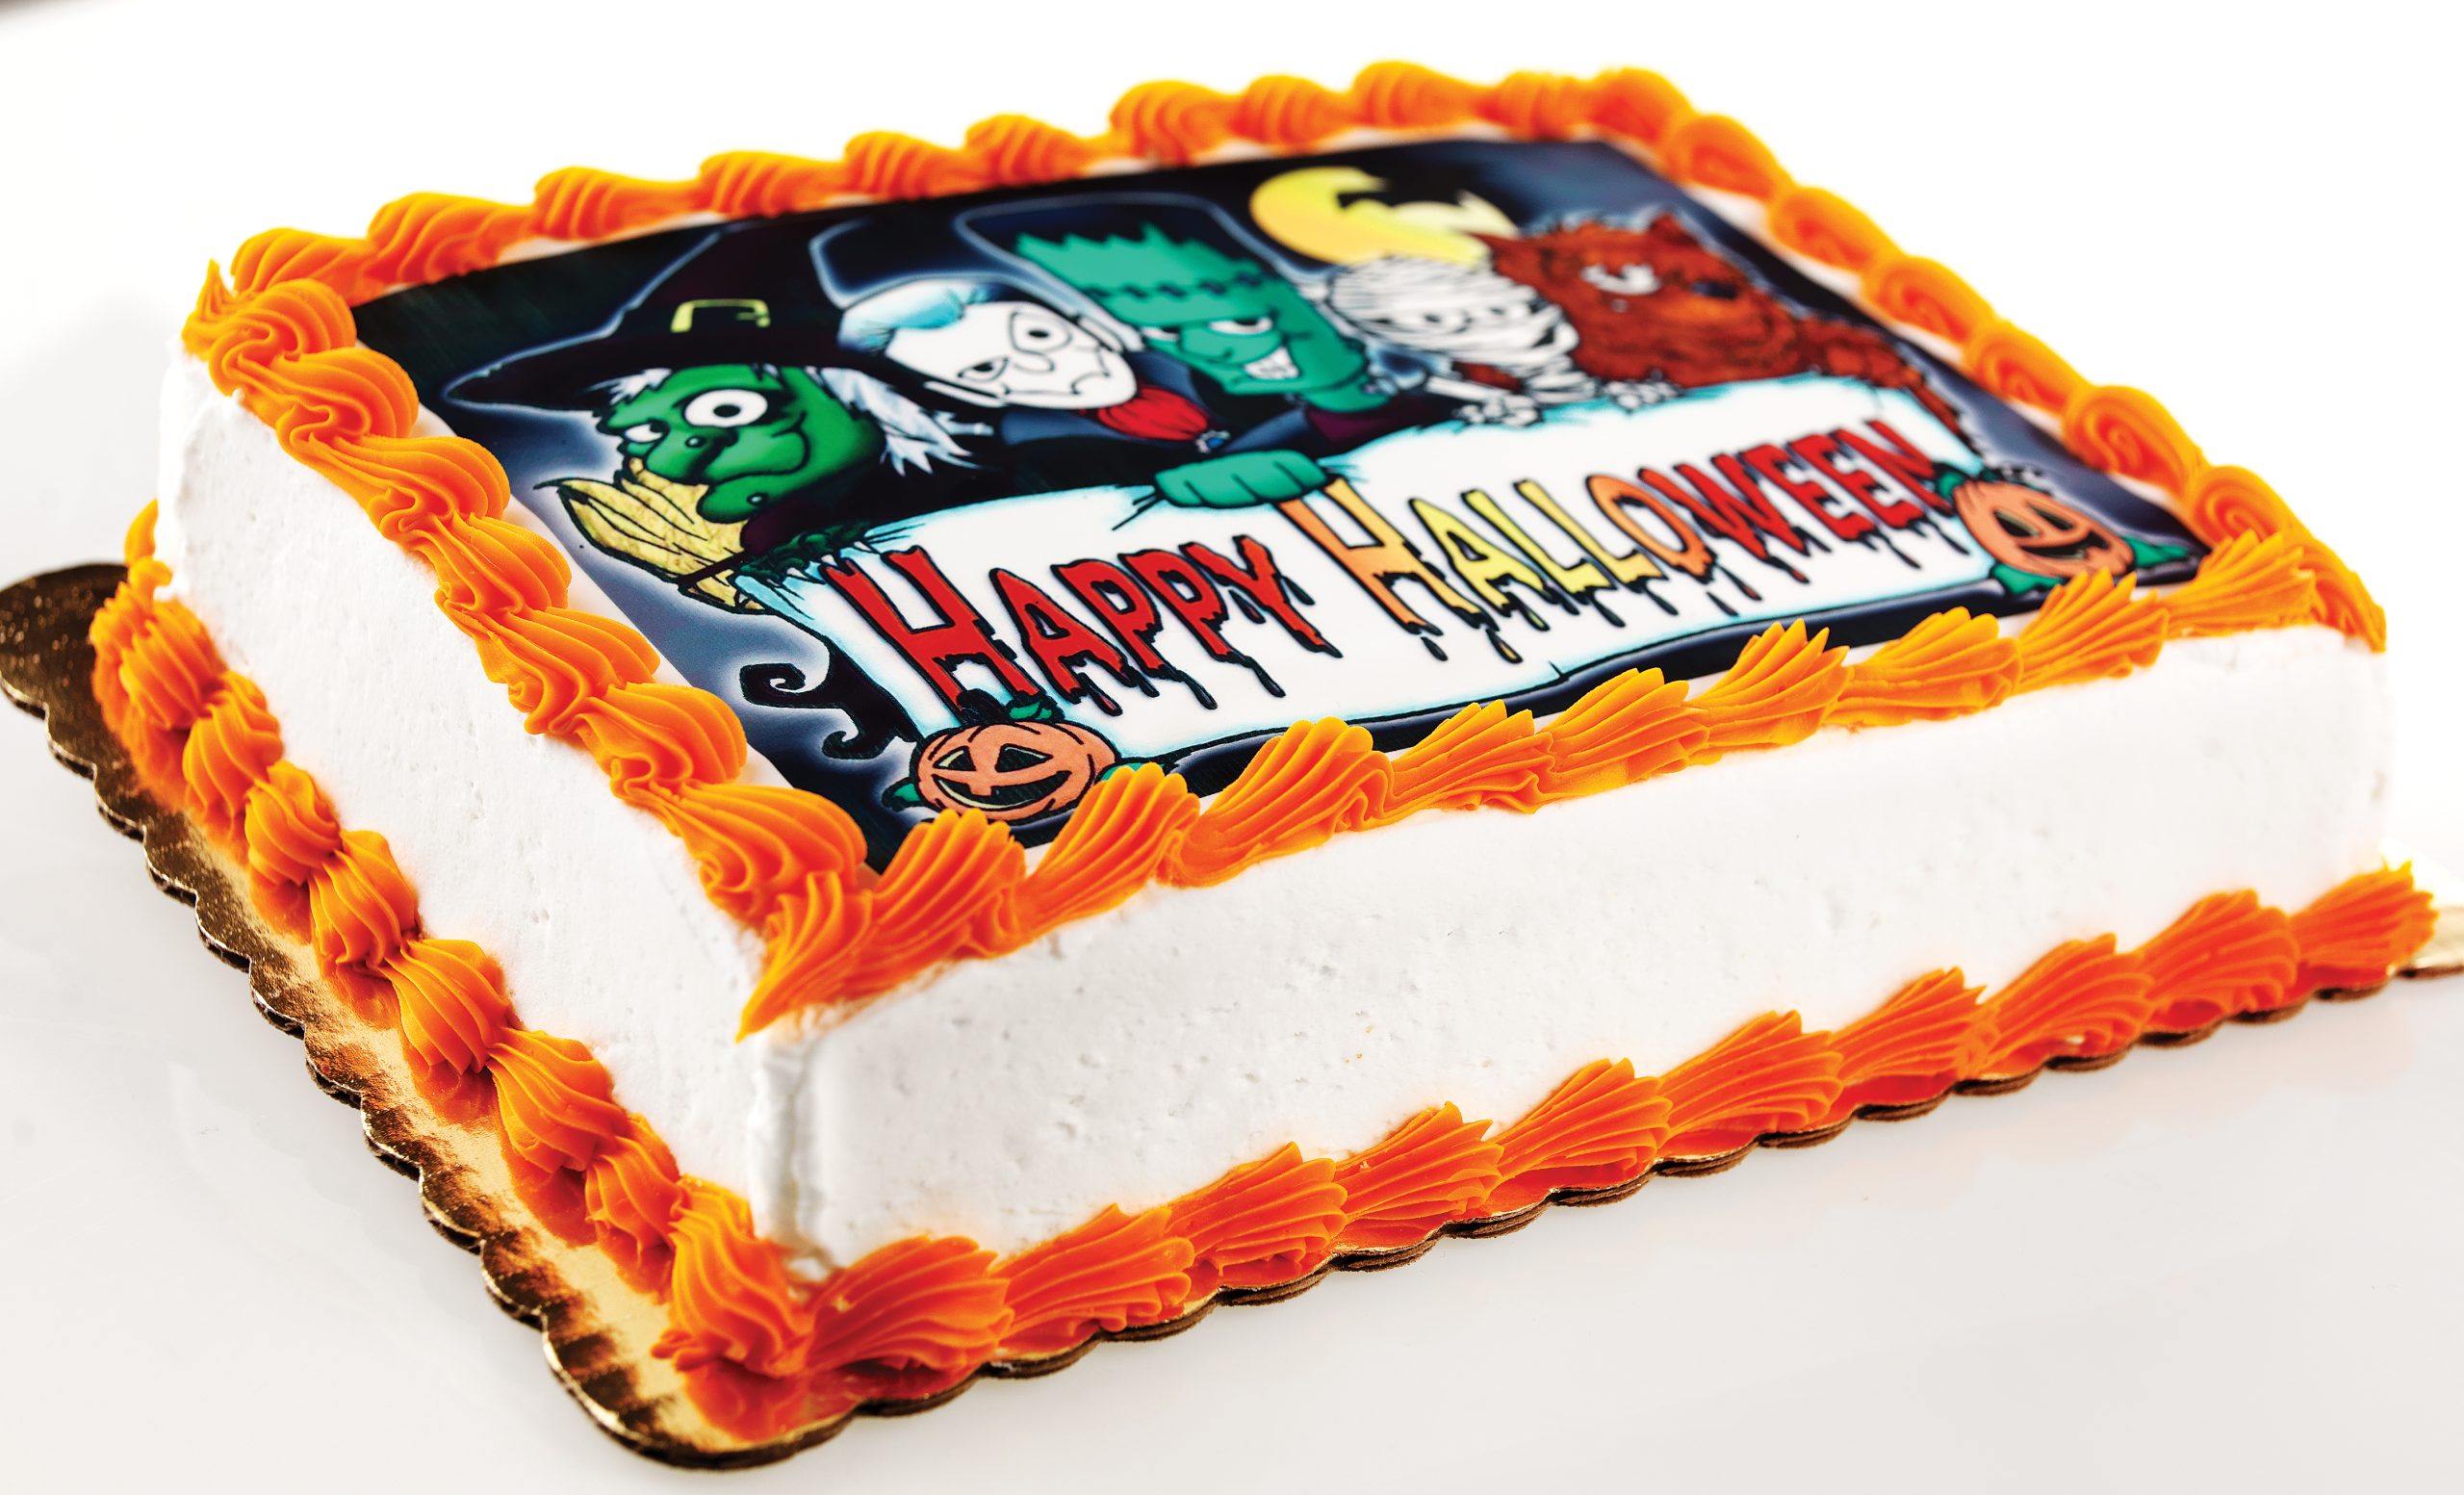 Cake Halloween Food Picture